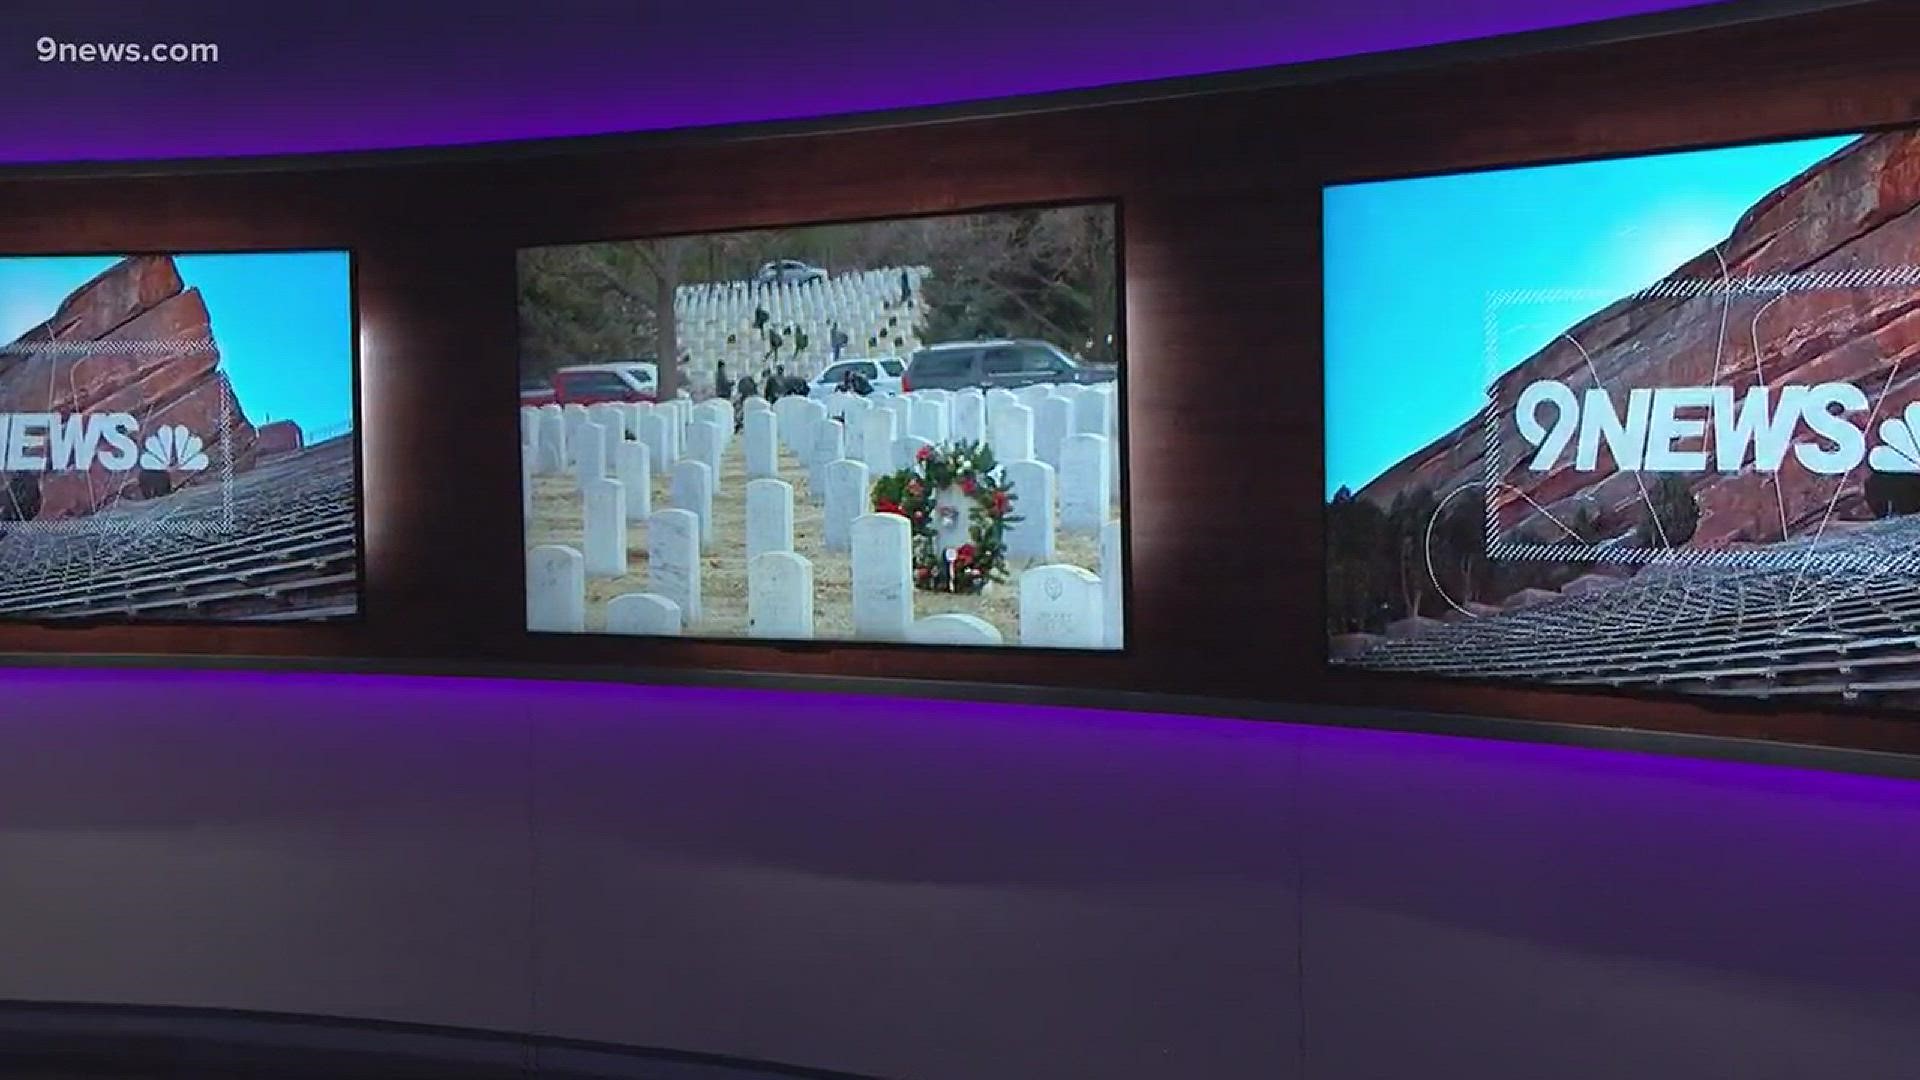 Thousands of veterans' graves were decorated with Christmas wreaths on National Wreaths Across America Day.